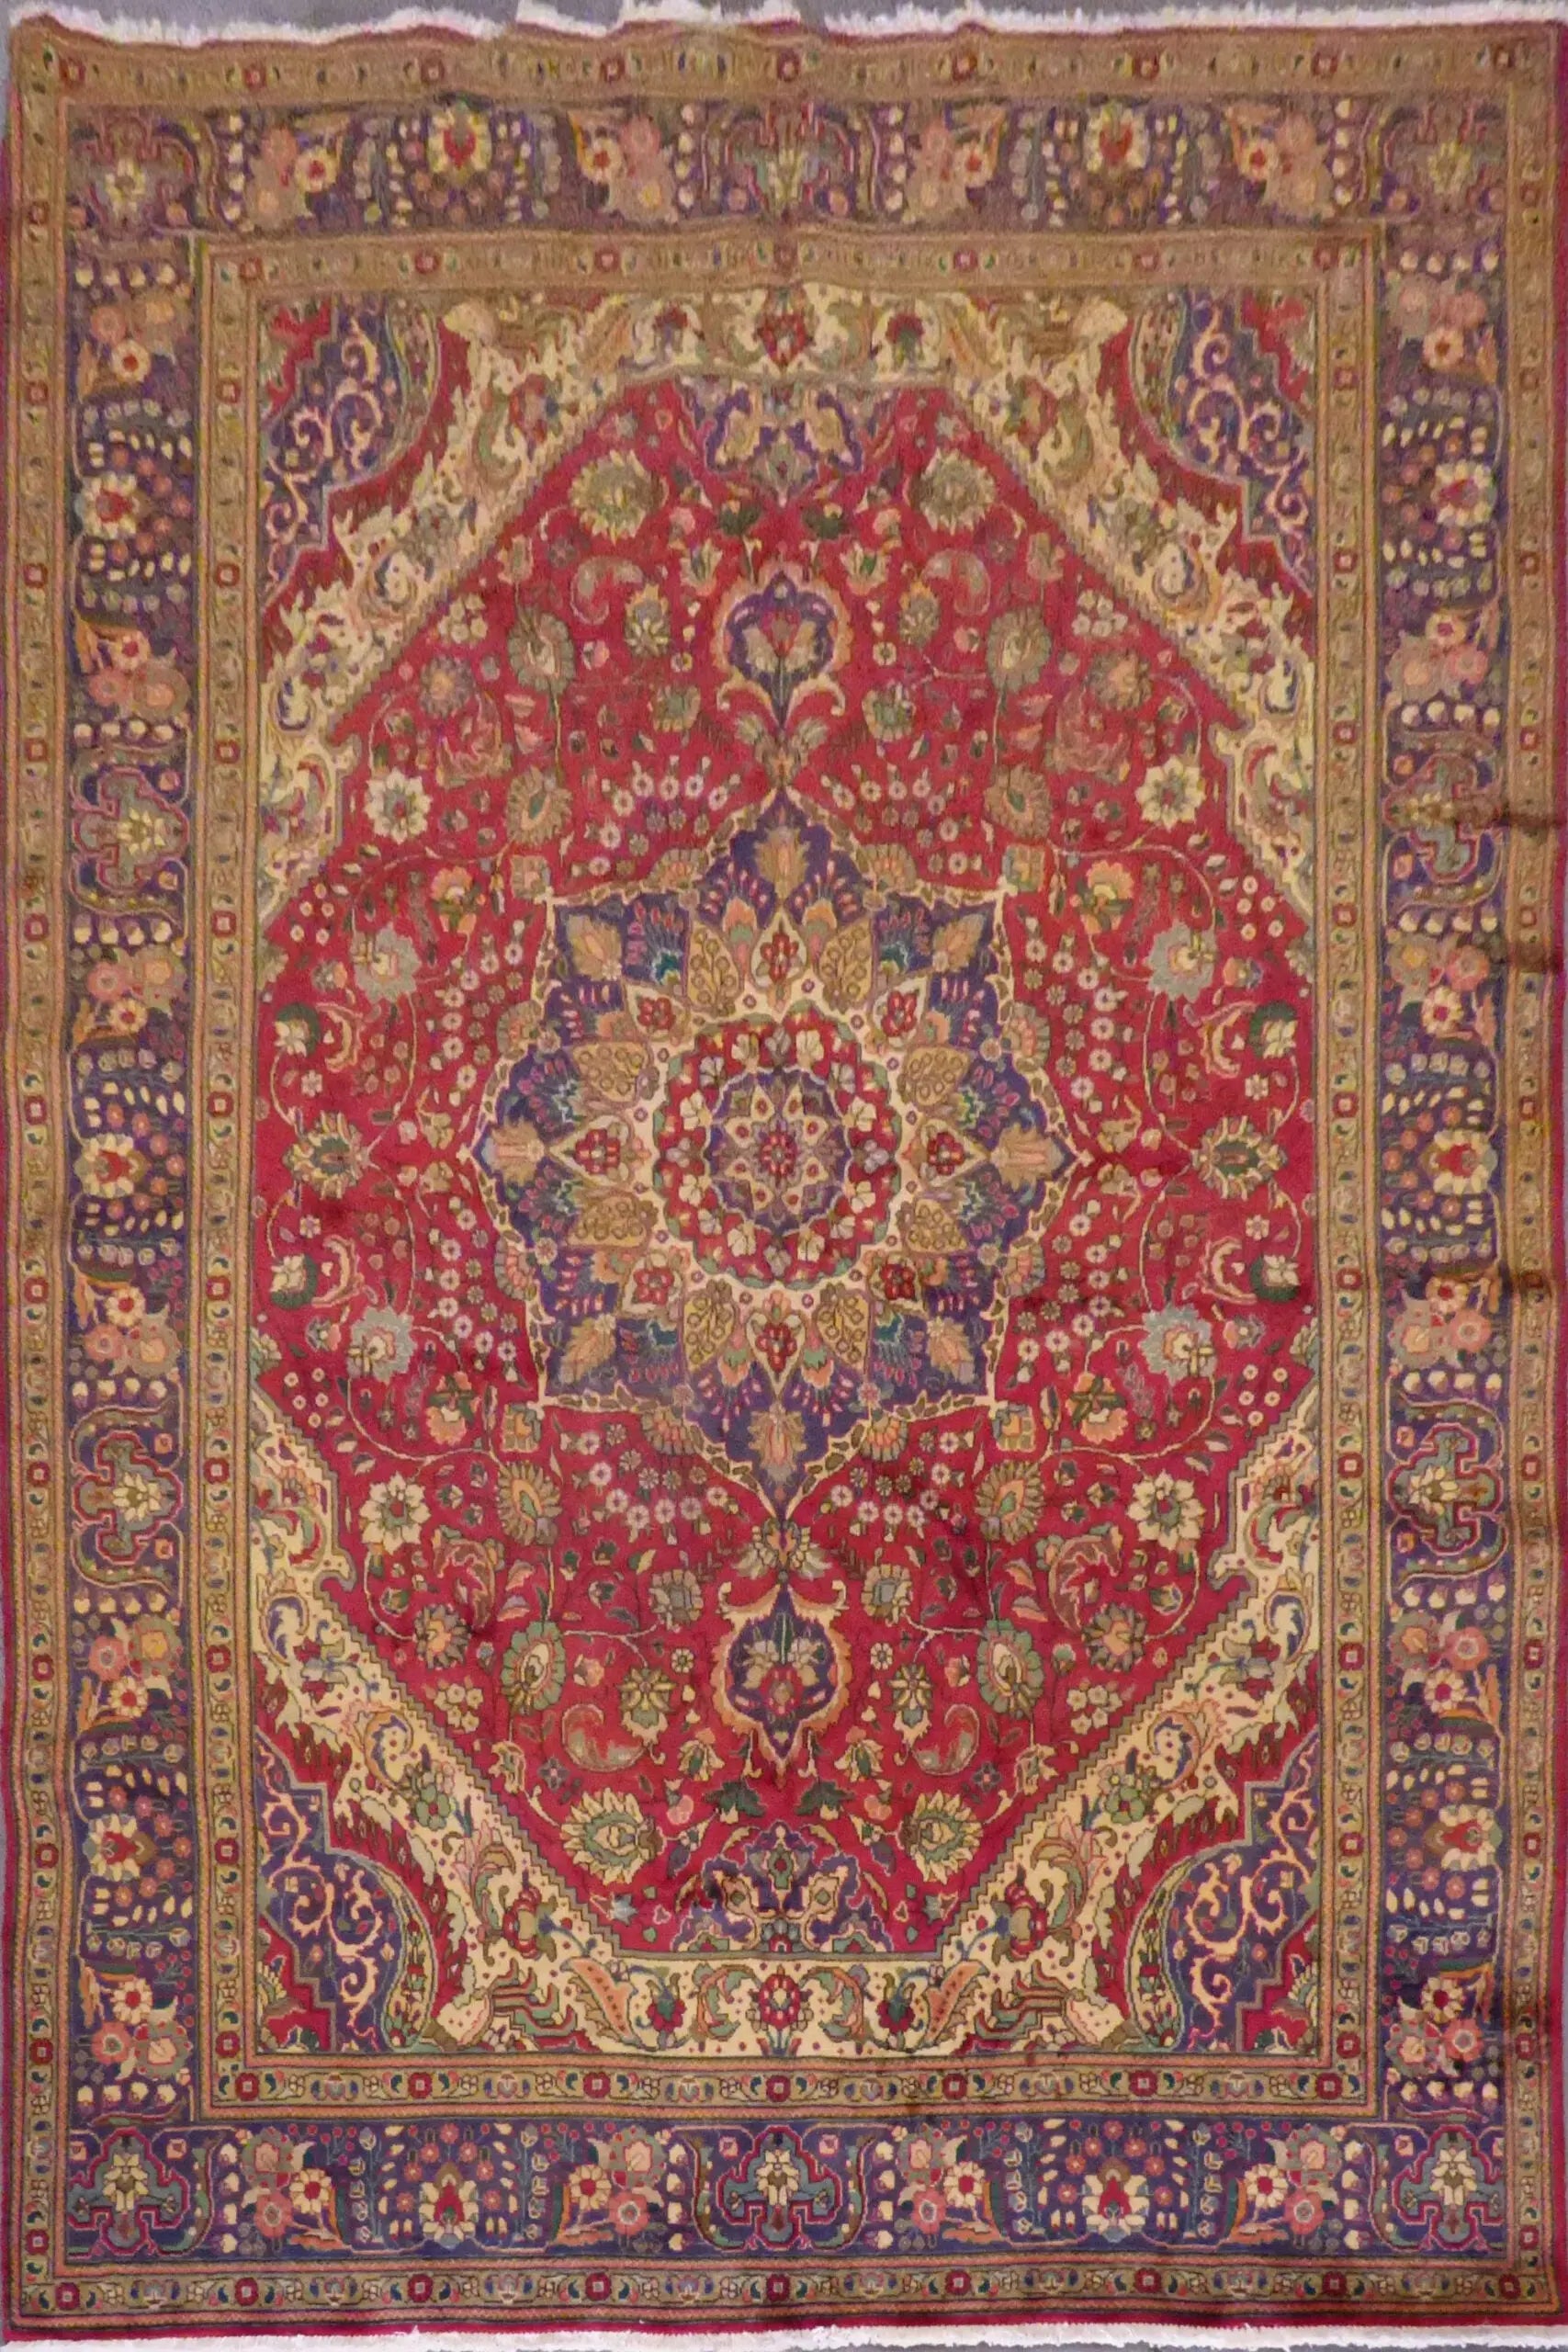 Persian Antique Hand Knotted Persian Tabriz Rugs, Traditional Floral, Natural Vegetable Dyes, Wool & Cotton, 10'9" X 8'4", Panr10509 (Red : 10509)